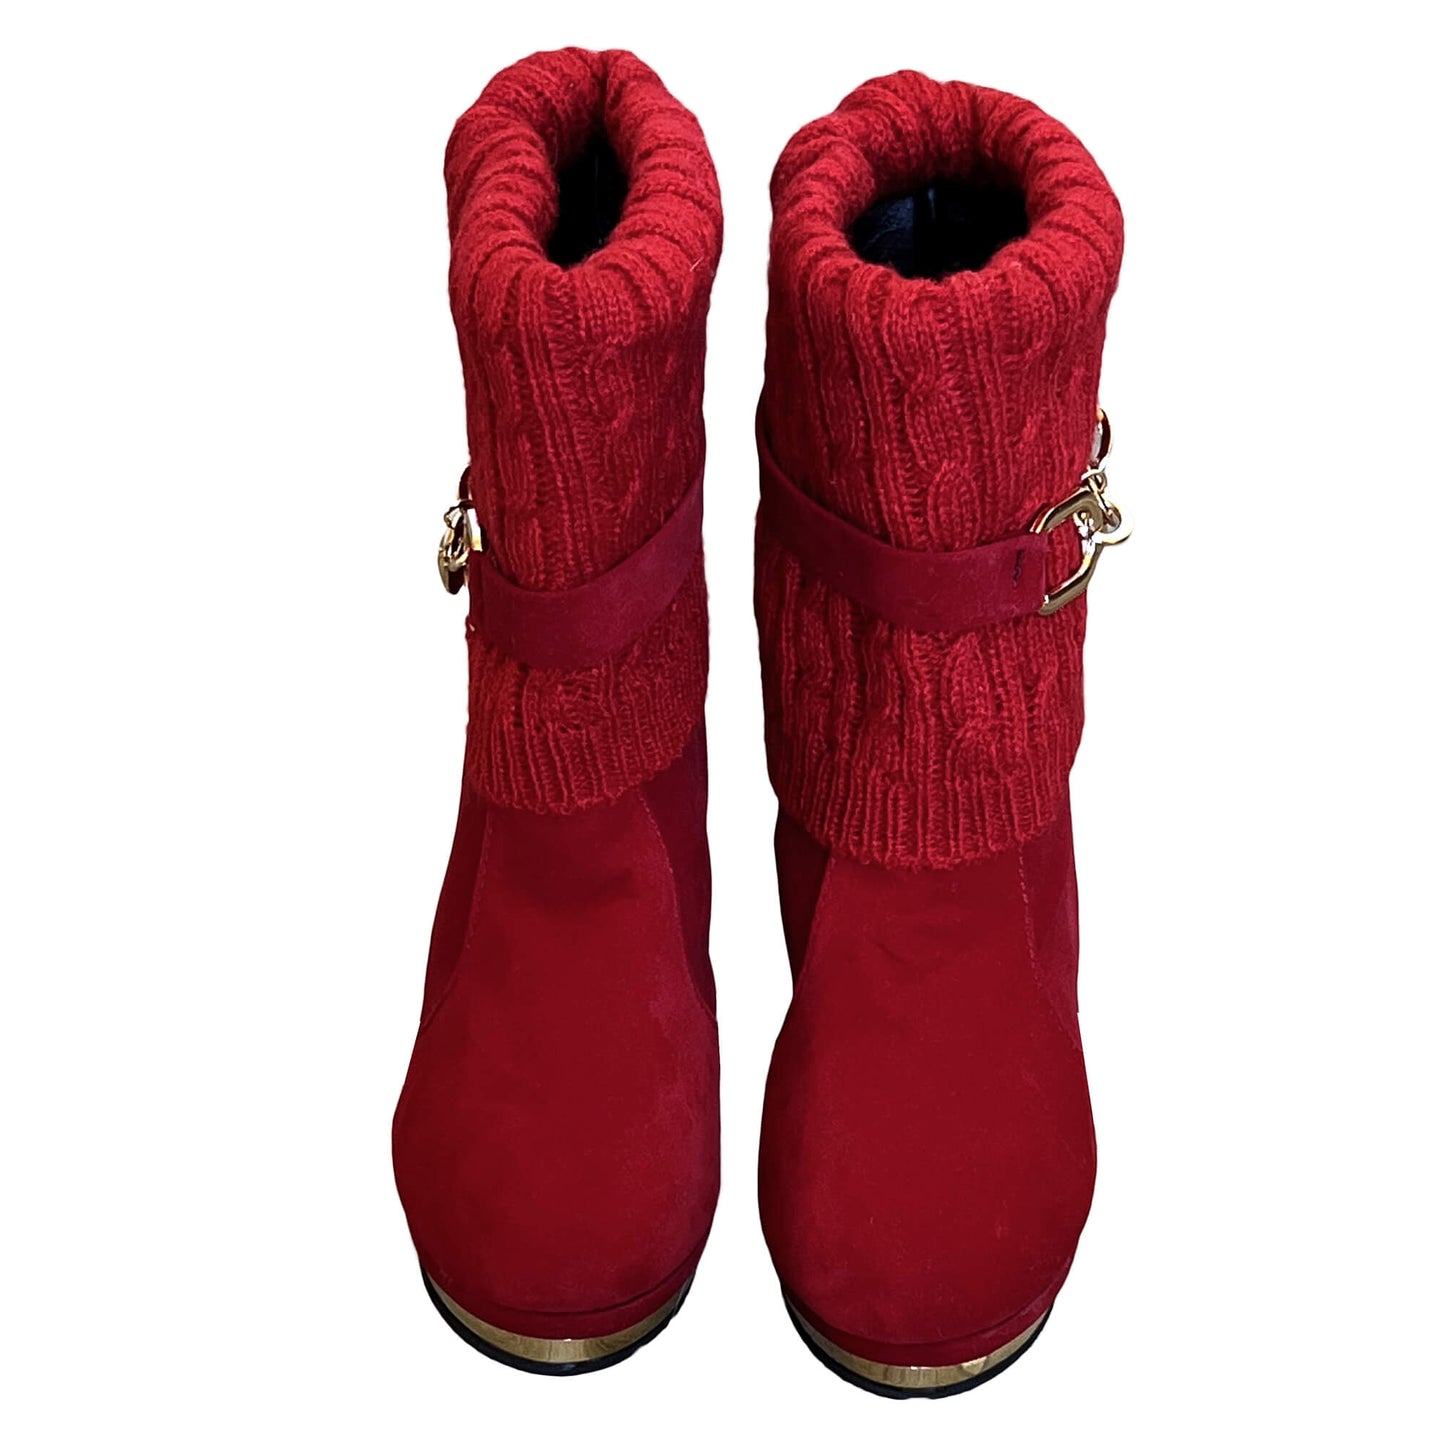 BBLAN-Red-Suede-Boots_Knit-Leg-Warmers_-Front-view.-Gold-Accents.Size-38.-Shop-eBargainsAndDeals.com